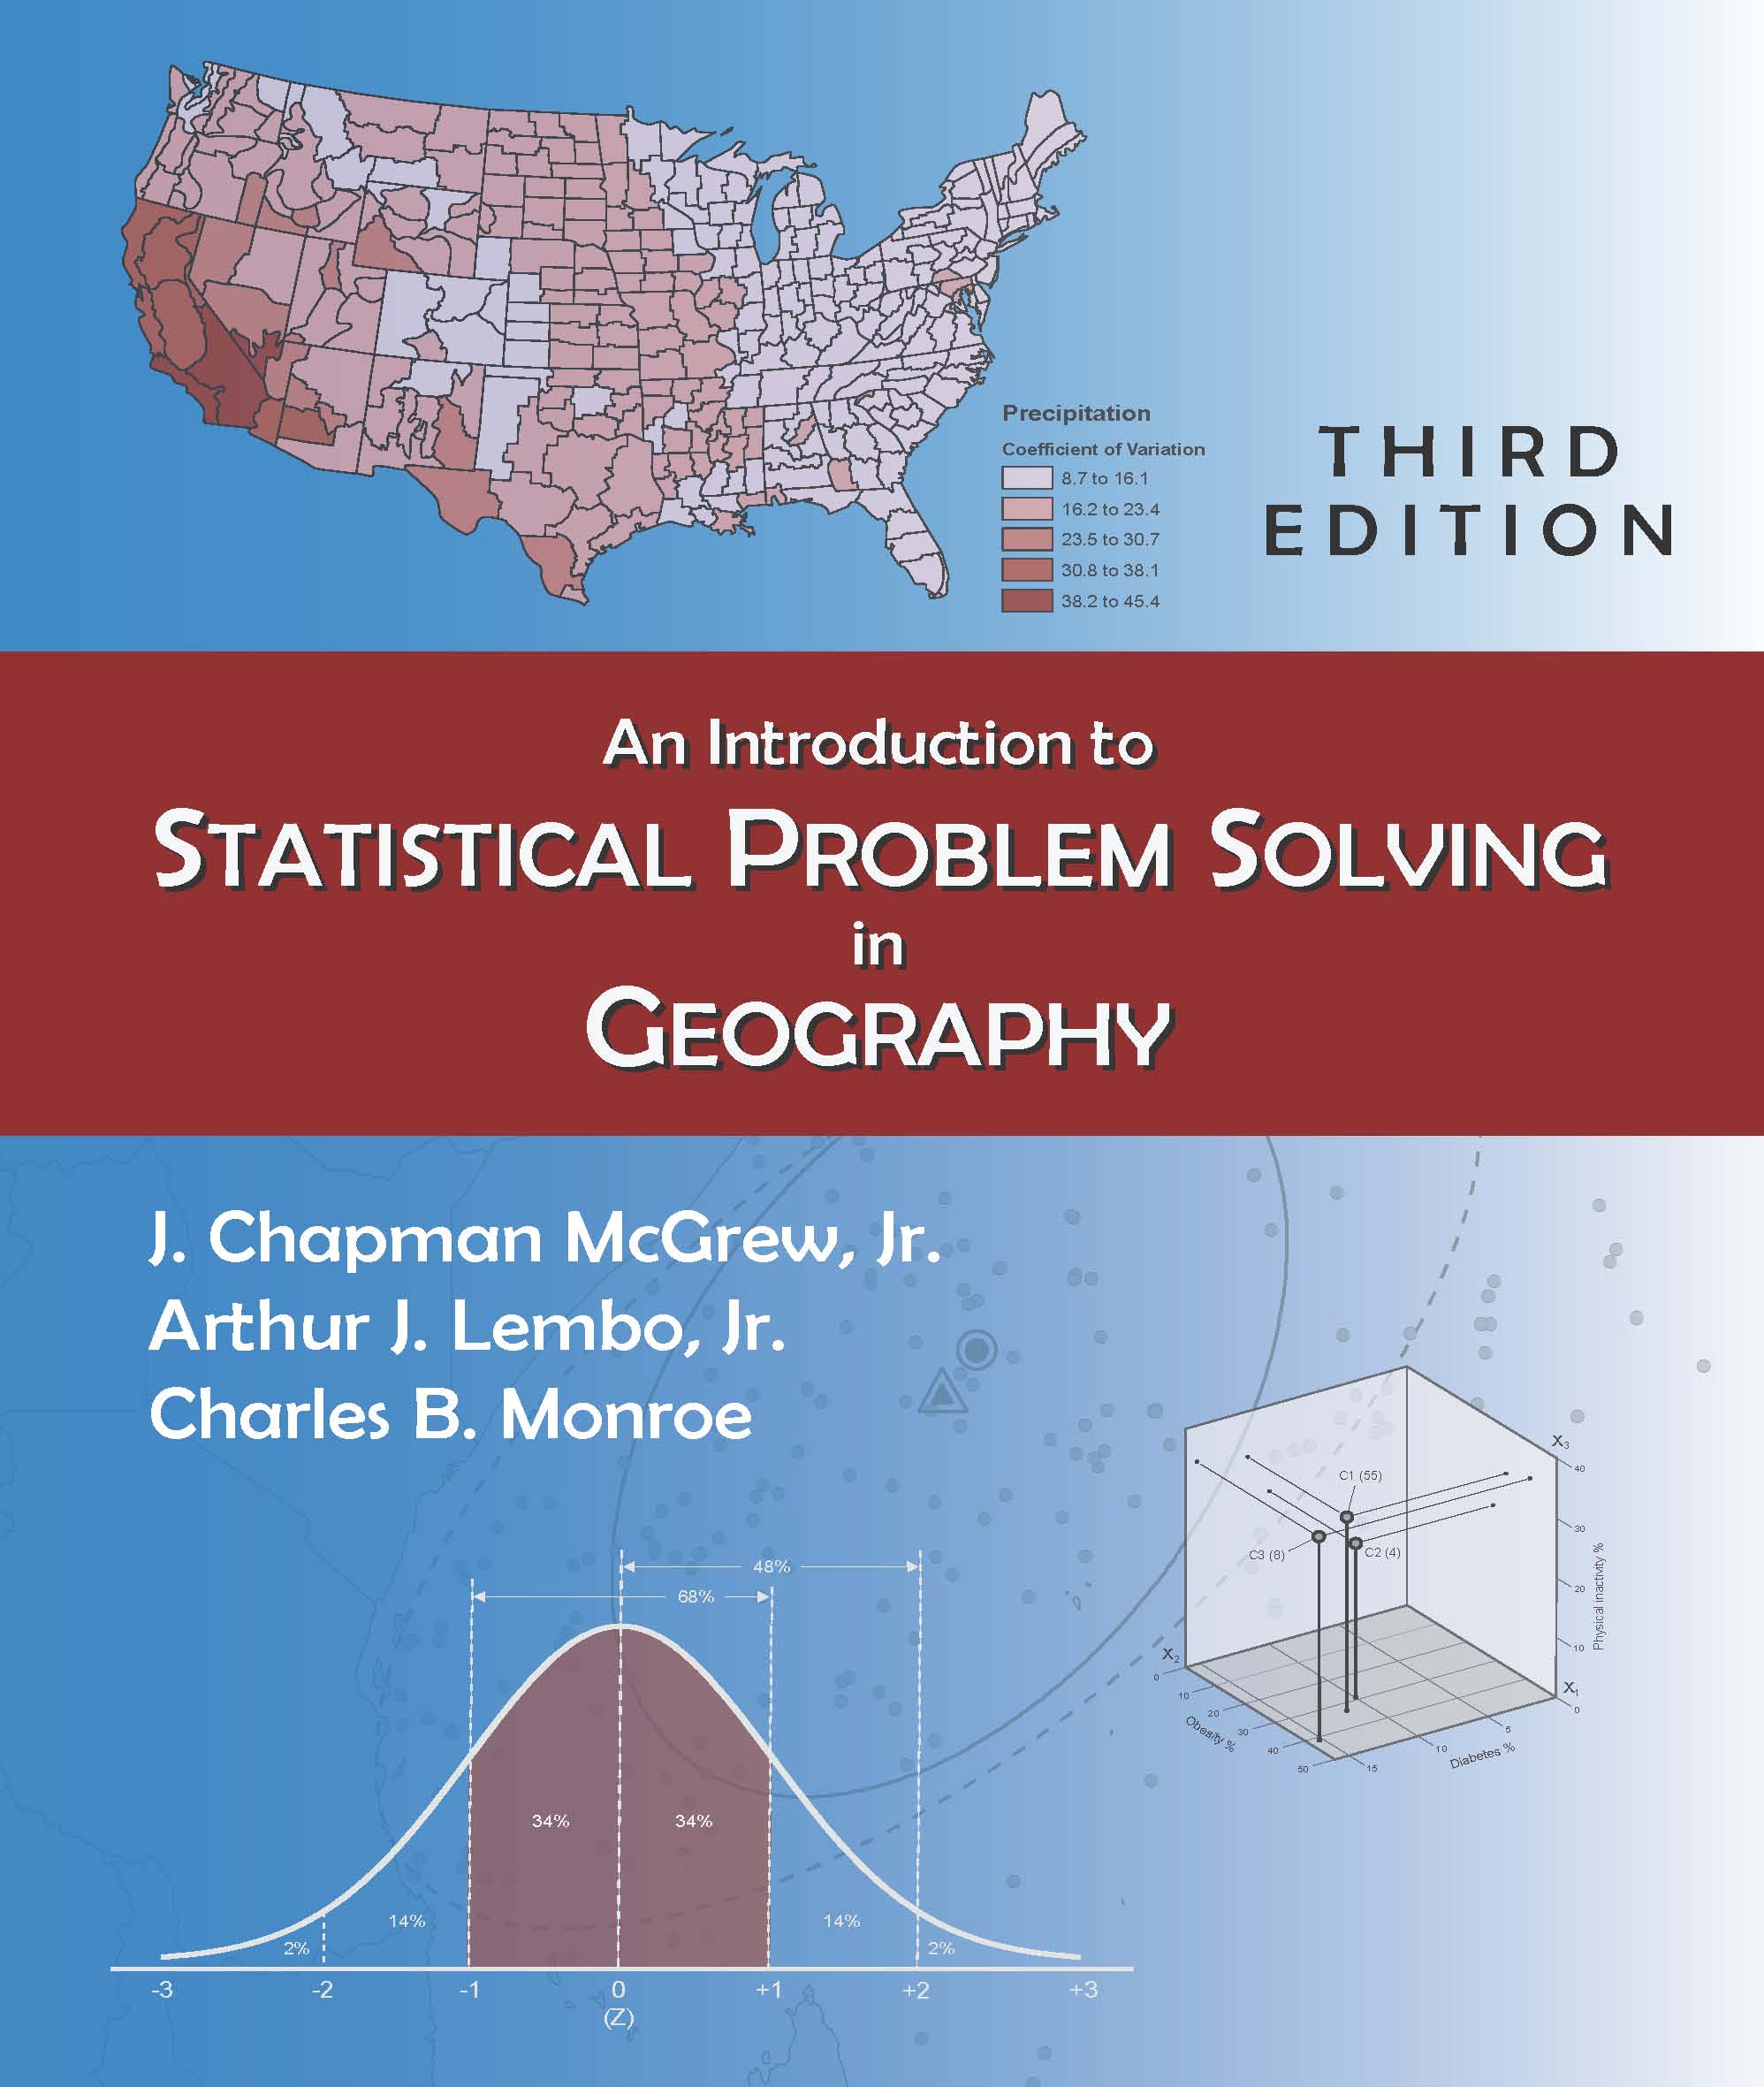 An Introduction to Statistical Problem Solving in Geography:  by J. Chapman McGrew, Jr., Arthur J. Lembo, Jr., Charles B. Monroe